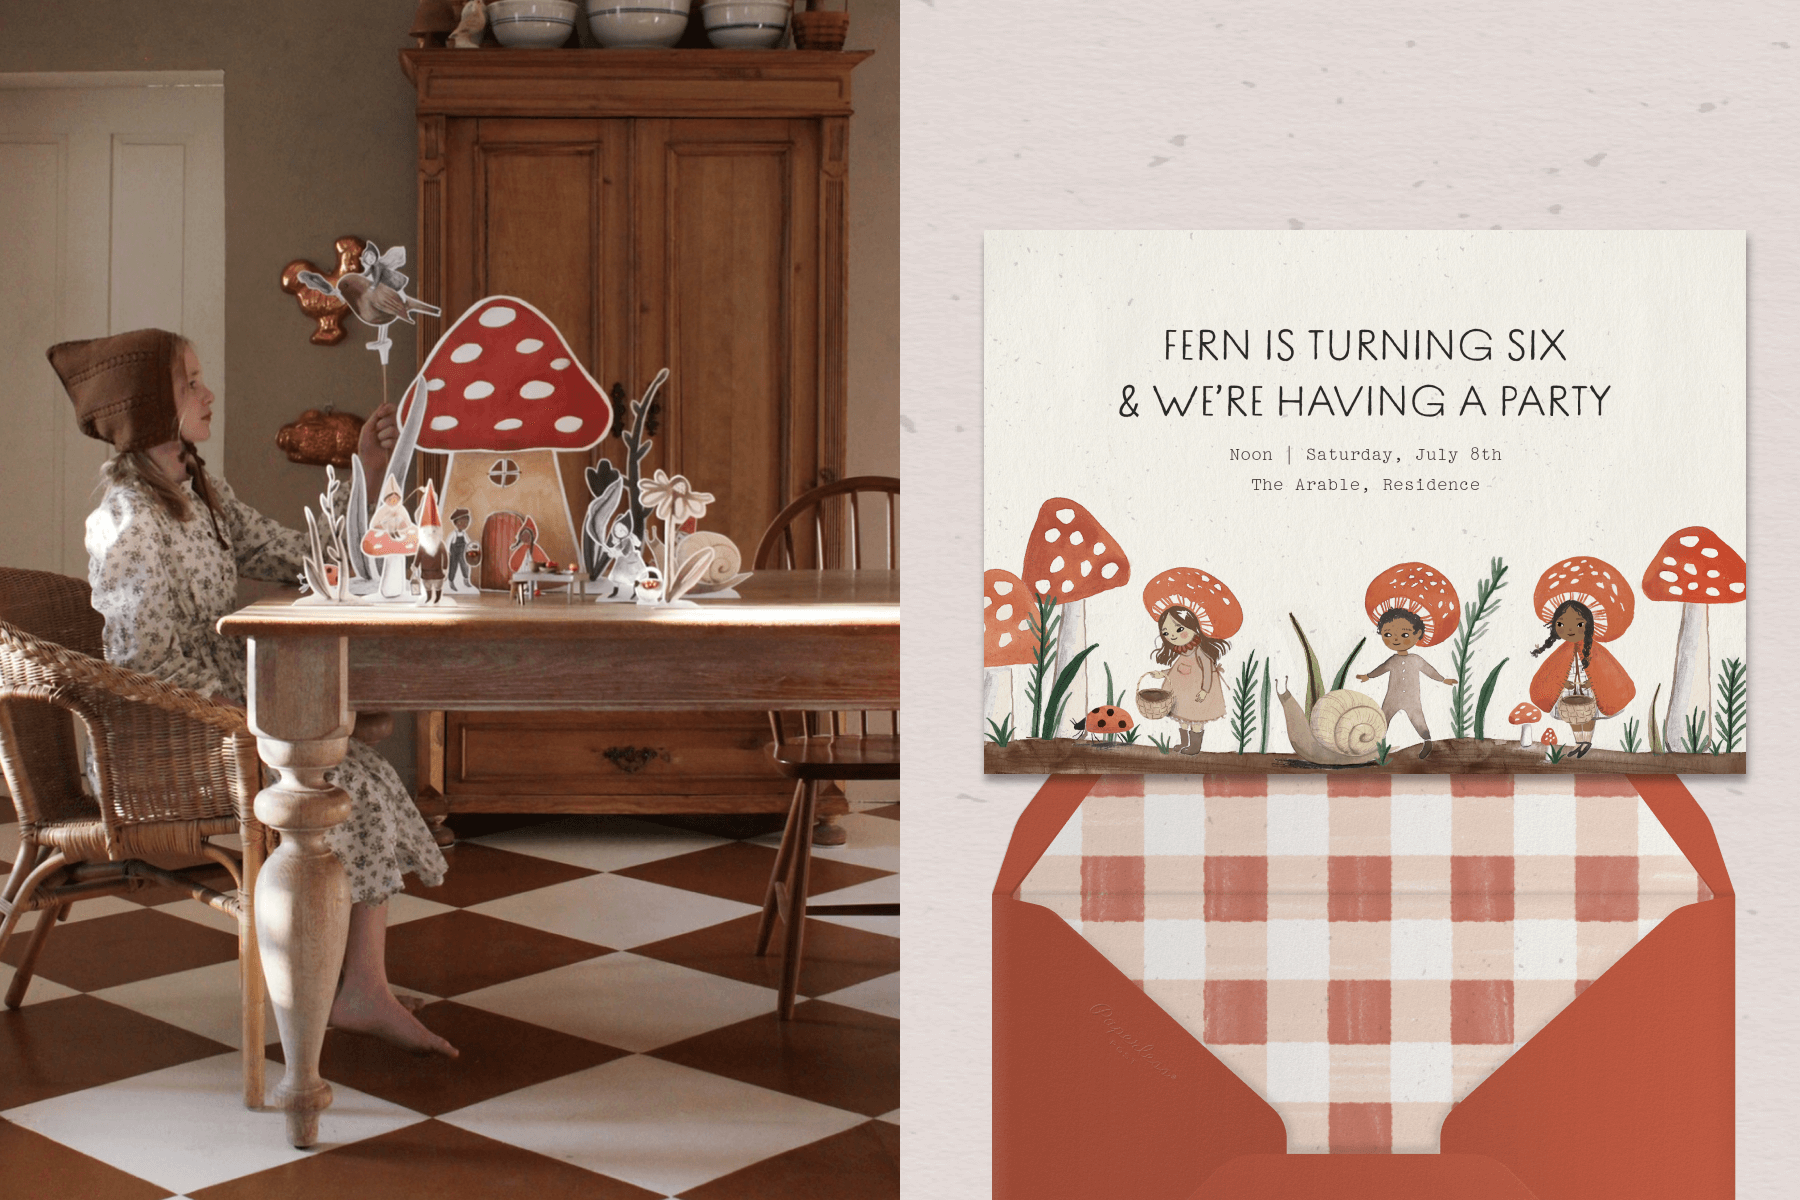 Left: Little girl sits at a kitchen table and plays with a paper cutout mushroom house and fairy scene. Right: Birthday party invitation featuring illustrated mushrooms and mushroom-capped children with an off-white background and red envelope. 